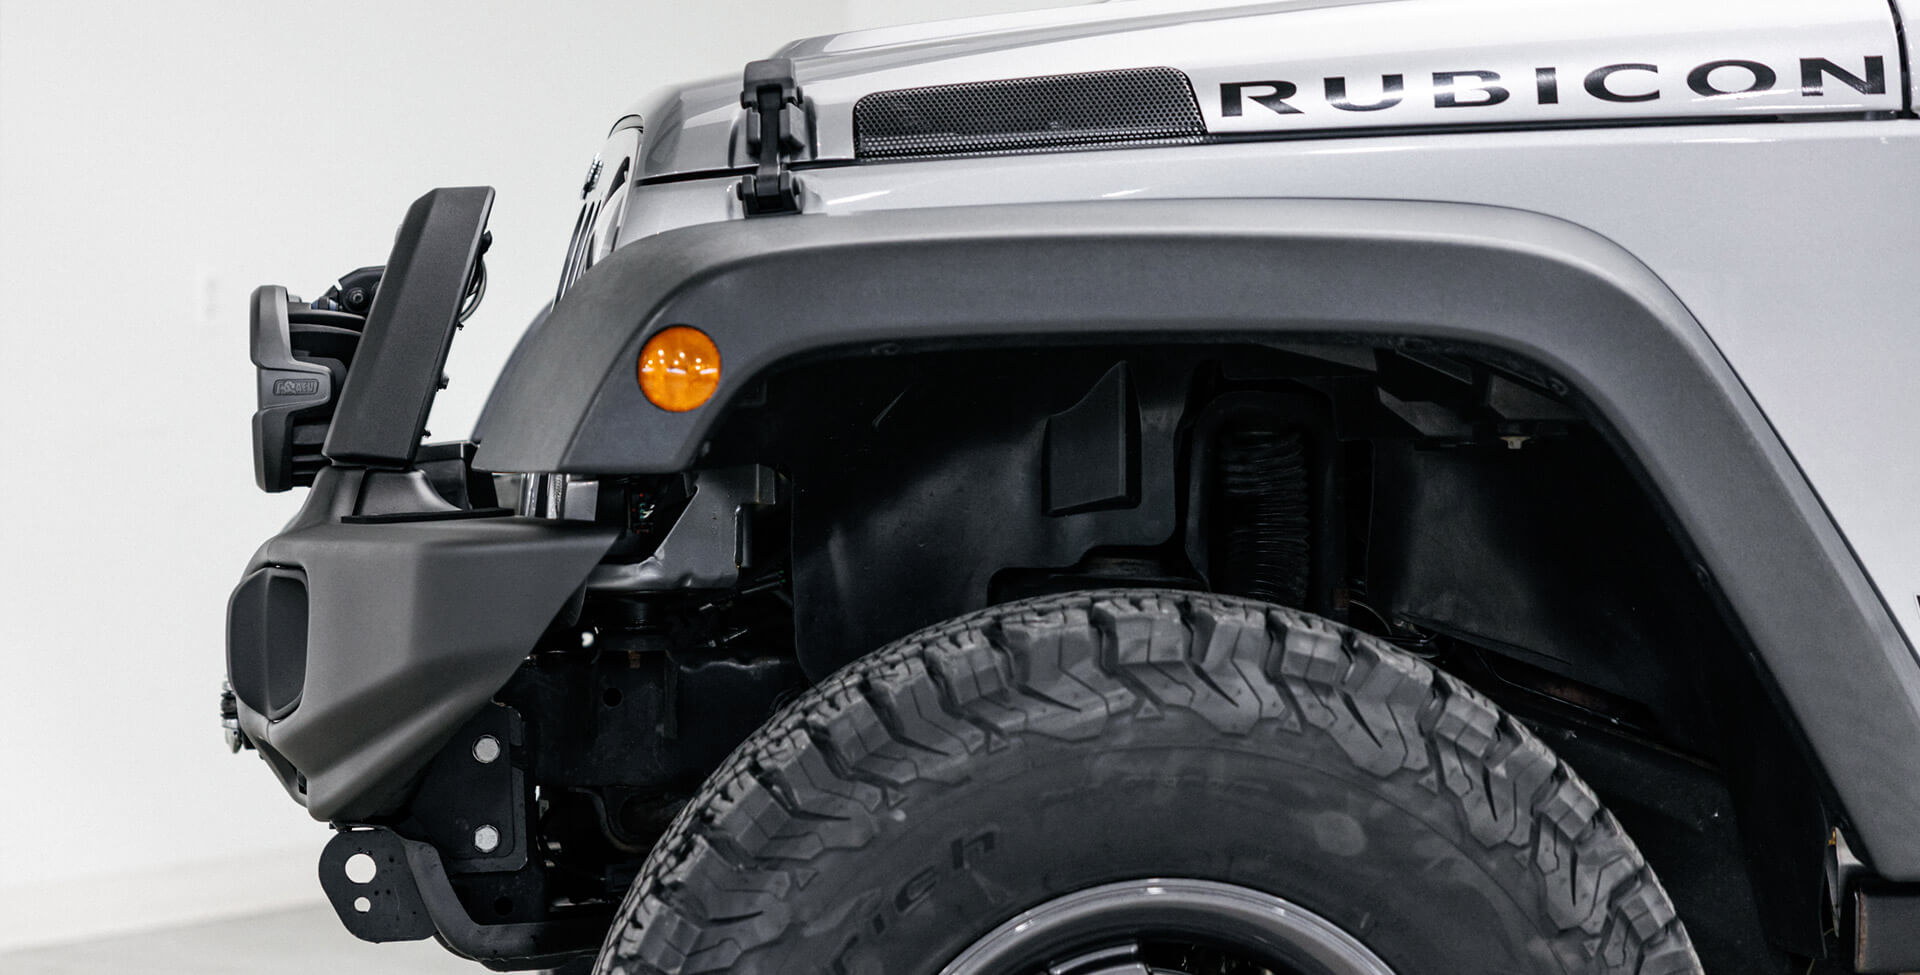 EX/RX Front Bumper for JK Wrangler - American Expedition Vehicles - AEV